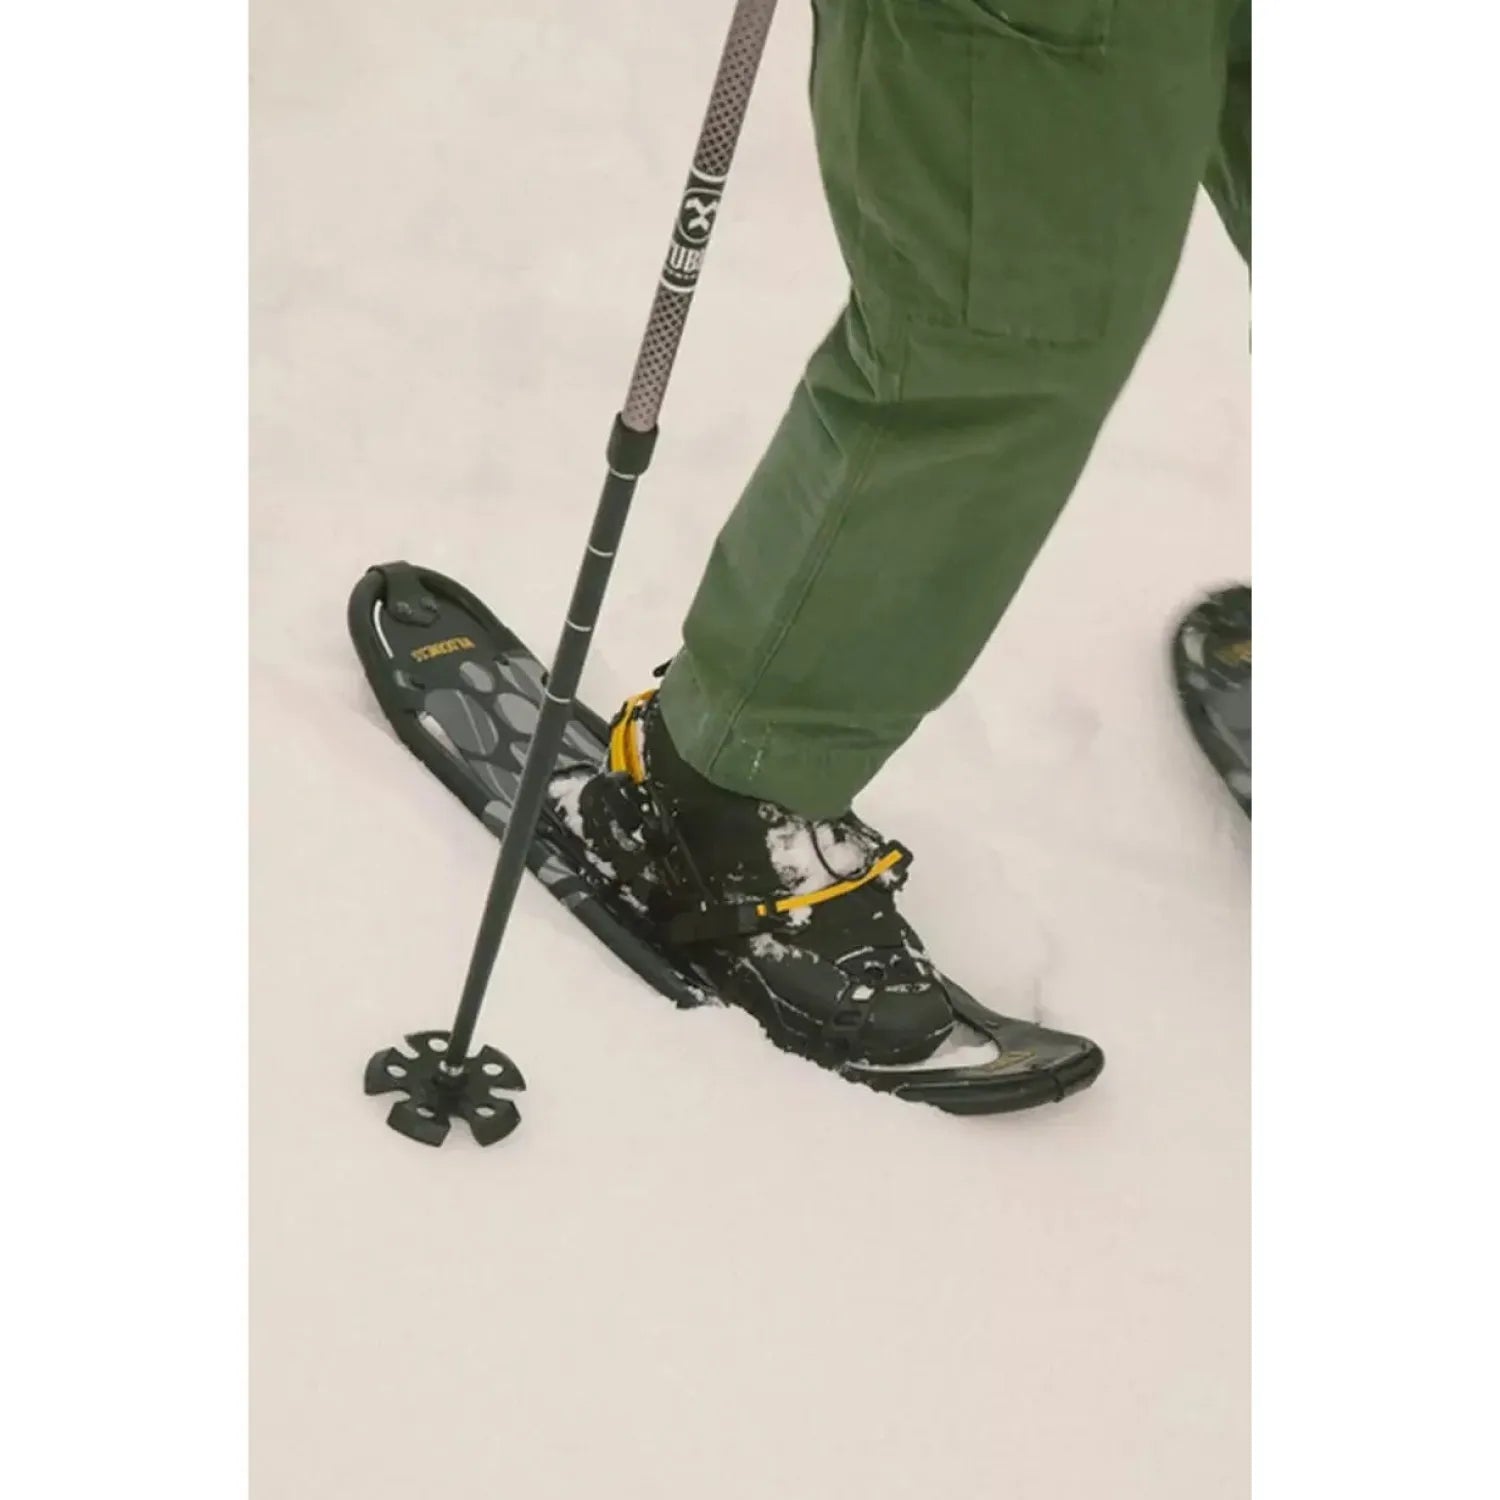 Tubbs Men's Wilderness Snowshoe in Black, lifestyle view on man trekking through deep snow with snowshoes on..